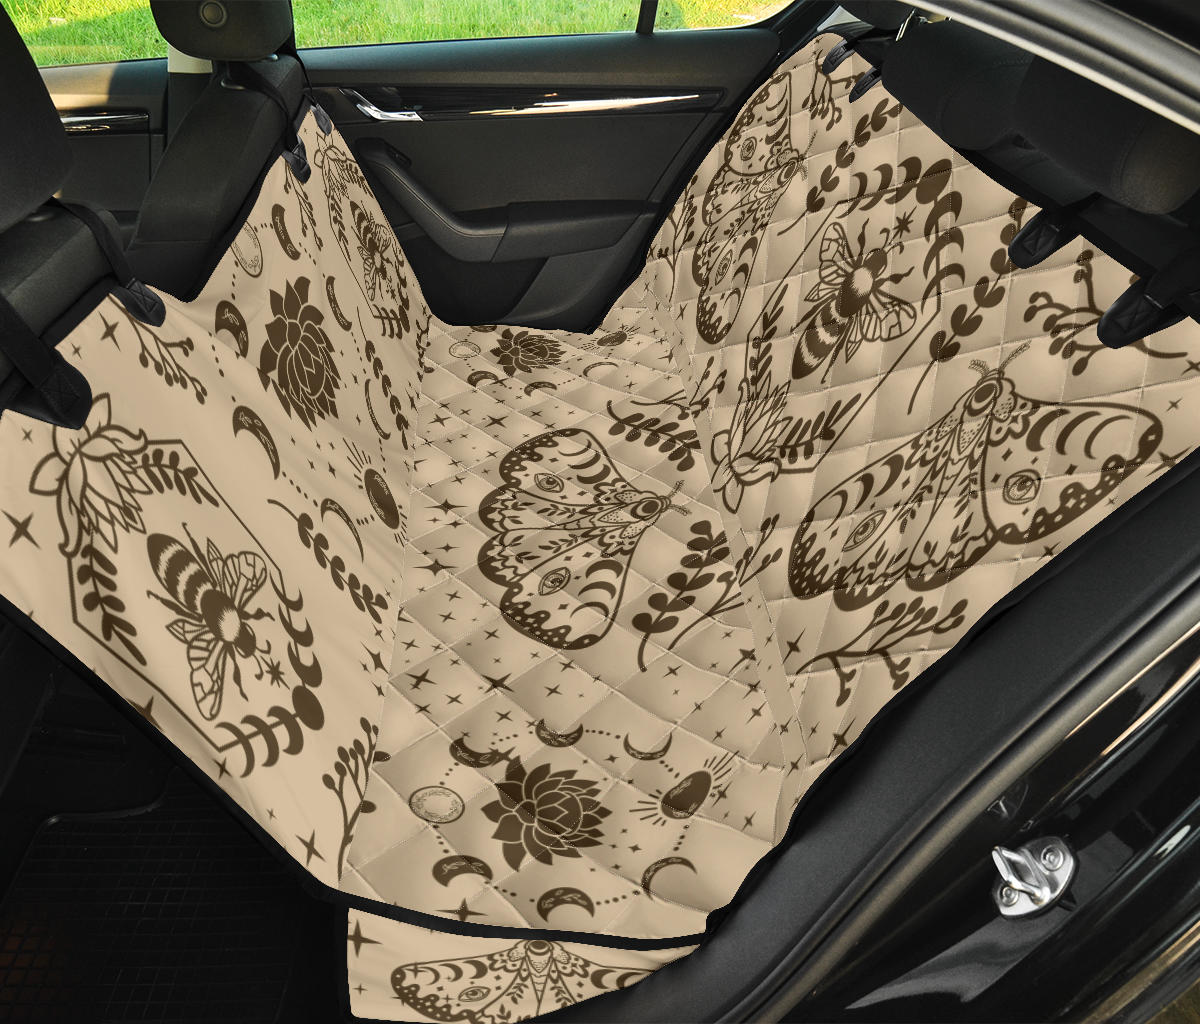 Honey Bee and Moth Car Pet Seat Cover